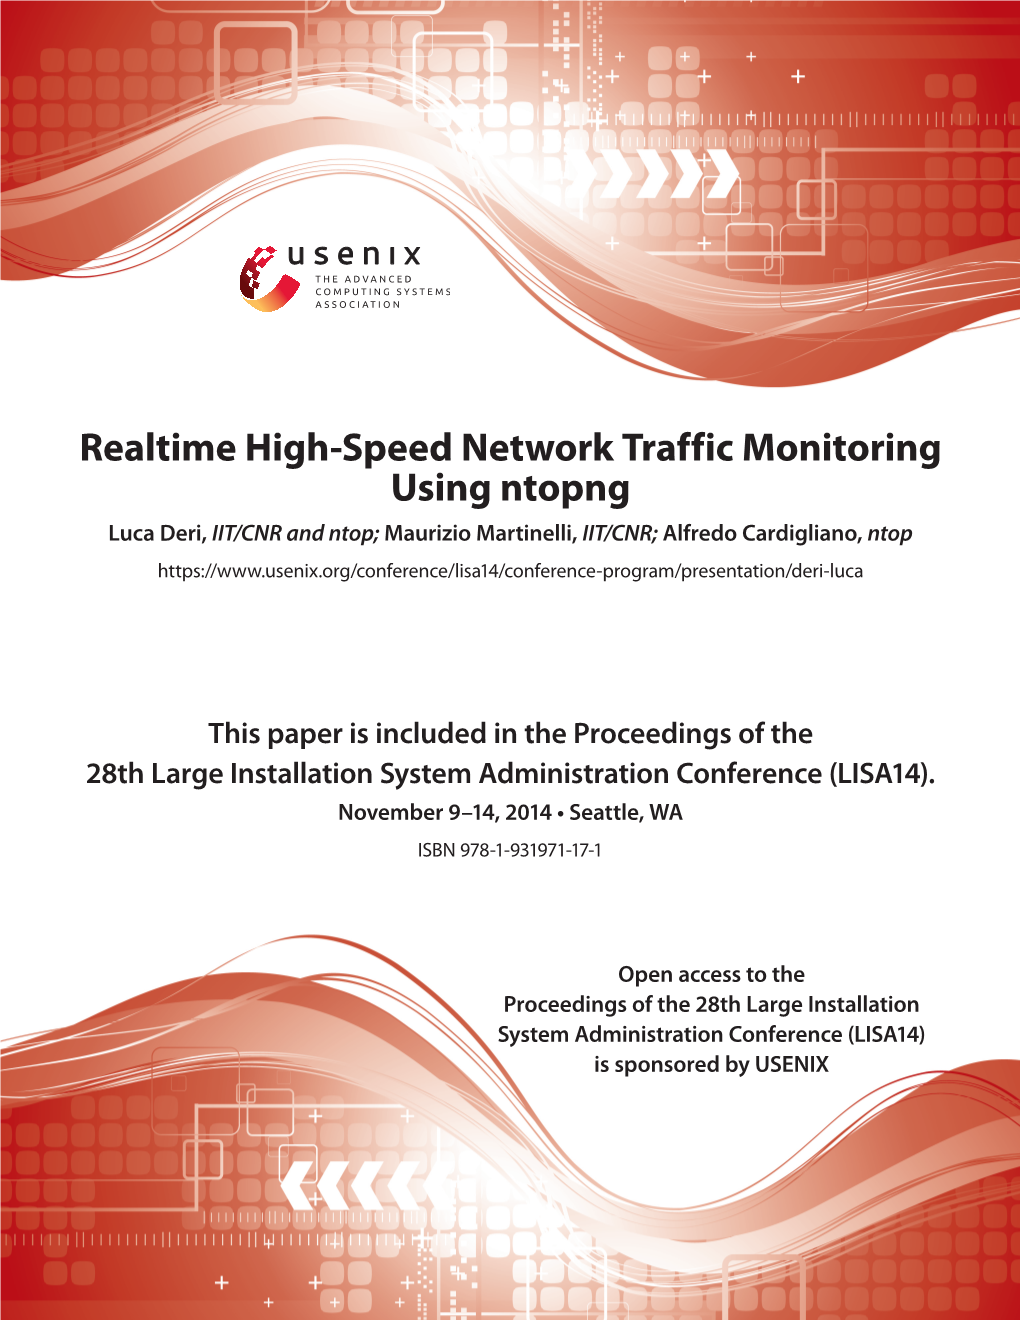 Realtime High-Speed Network Traffic Monitoring Using Ntopng